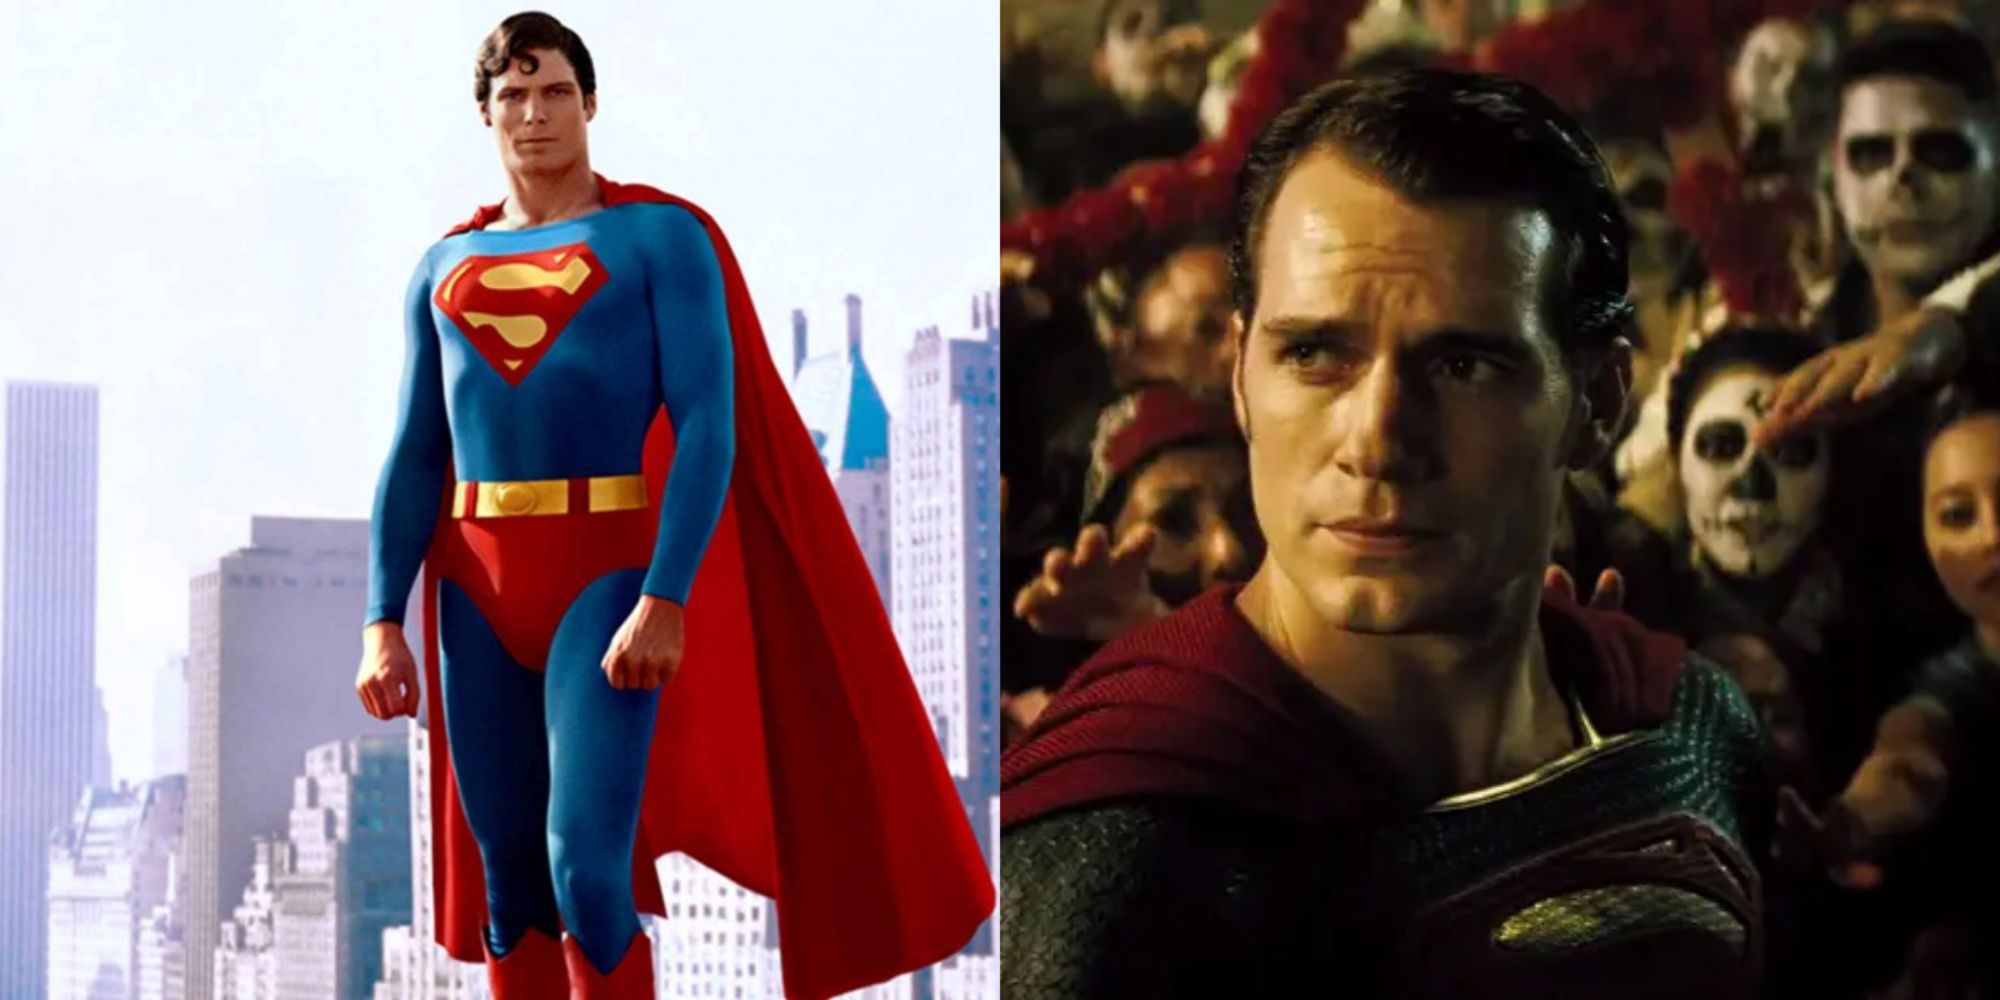 Two images from the Superman movies